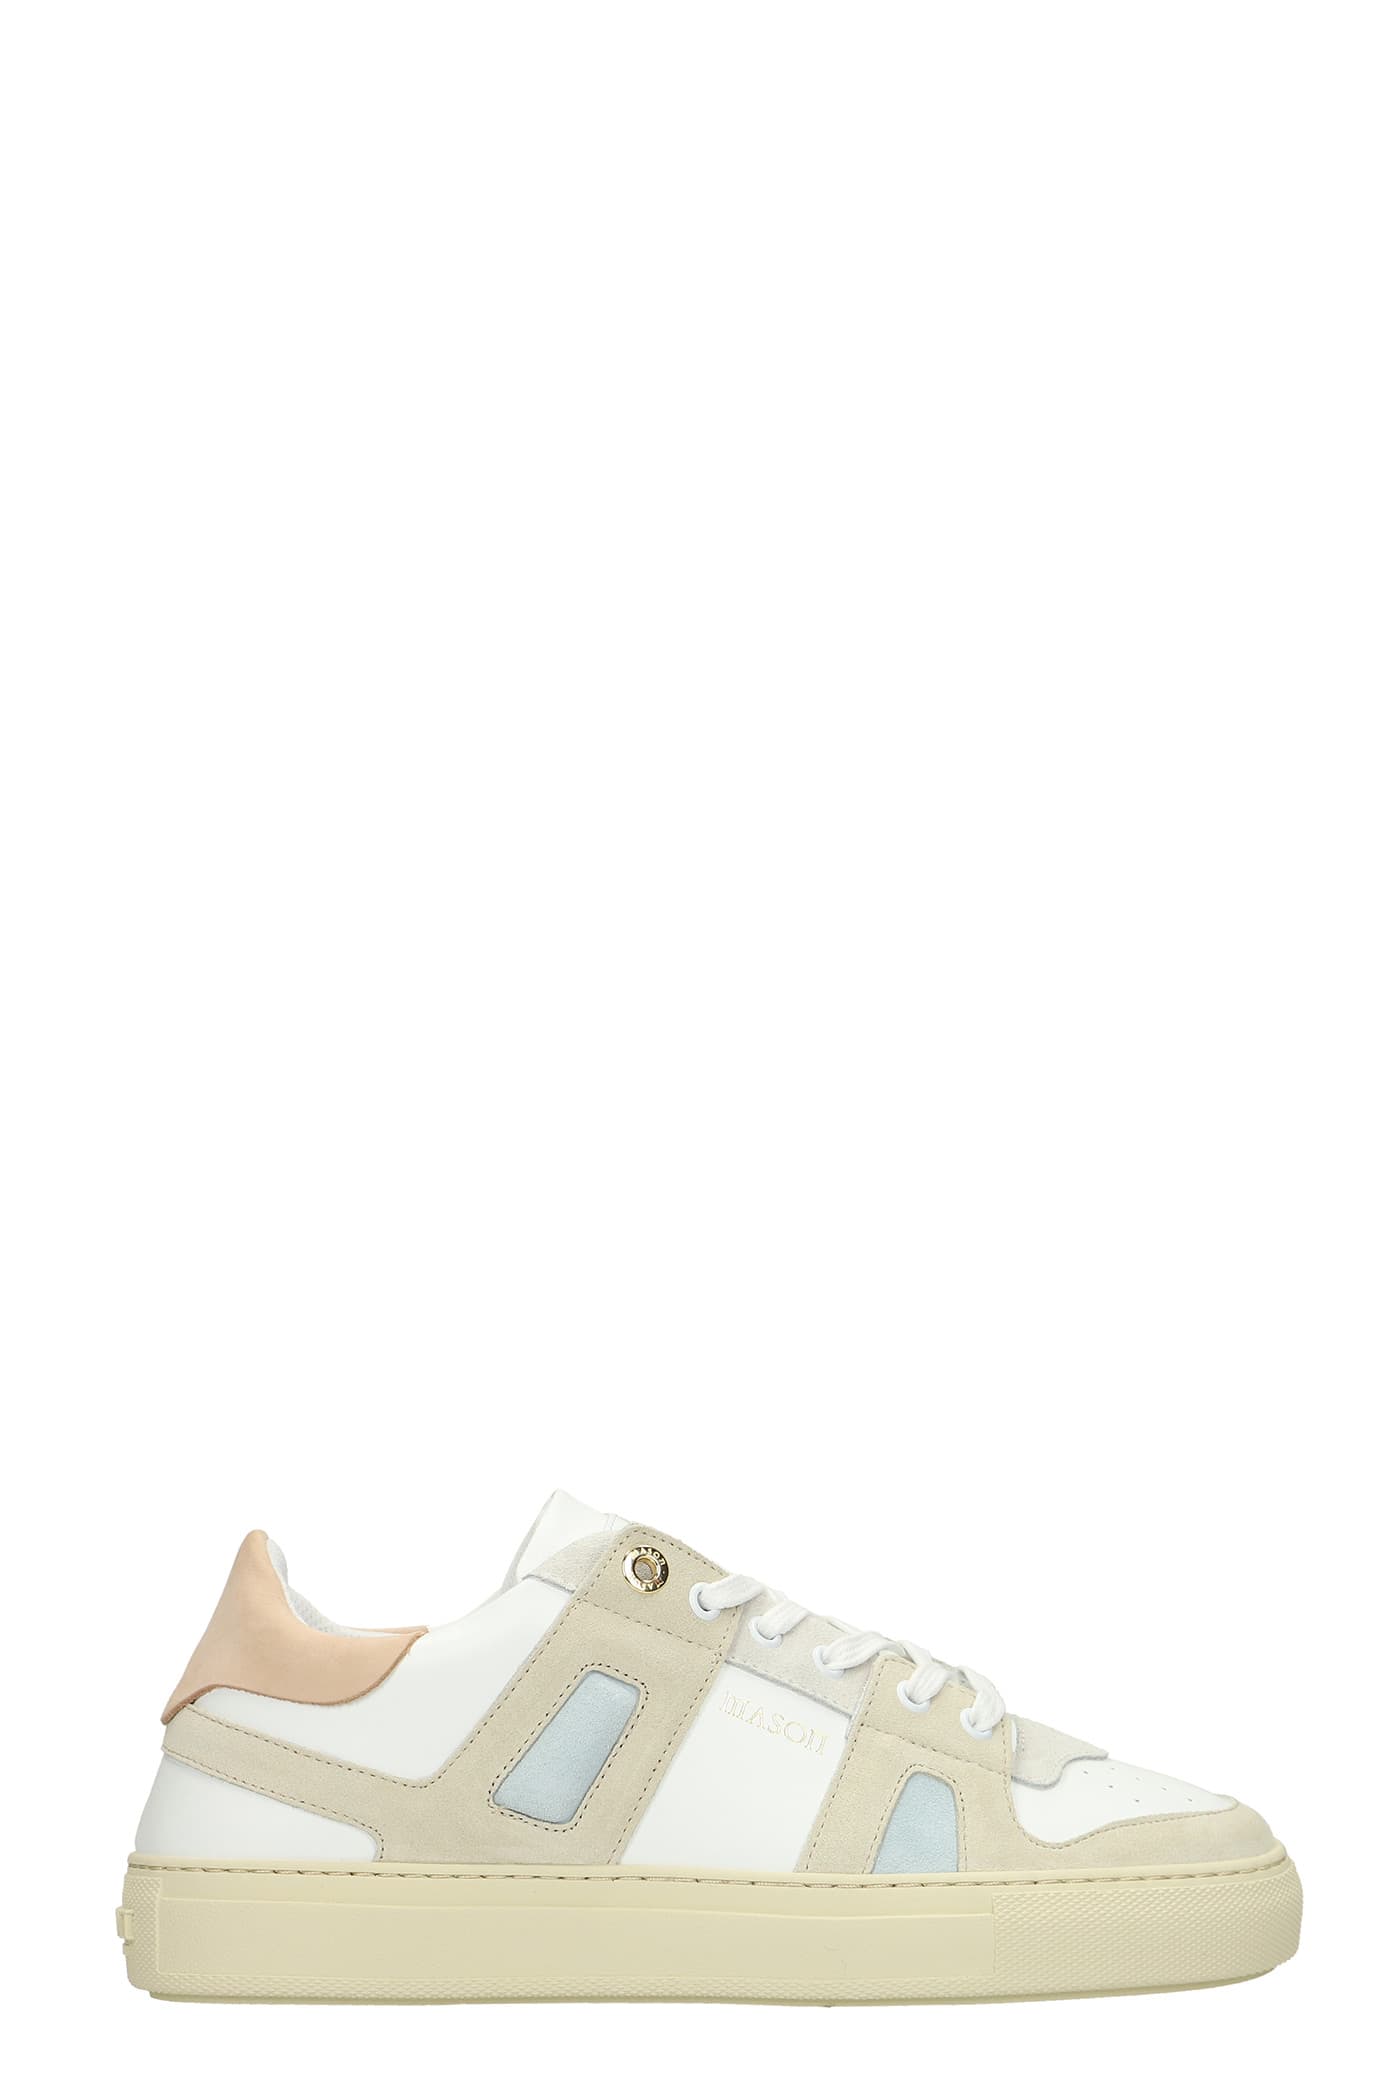 Mason Garments Bari Sneakers In White Suede And Leather | ModeSens